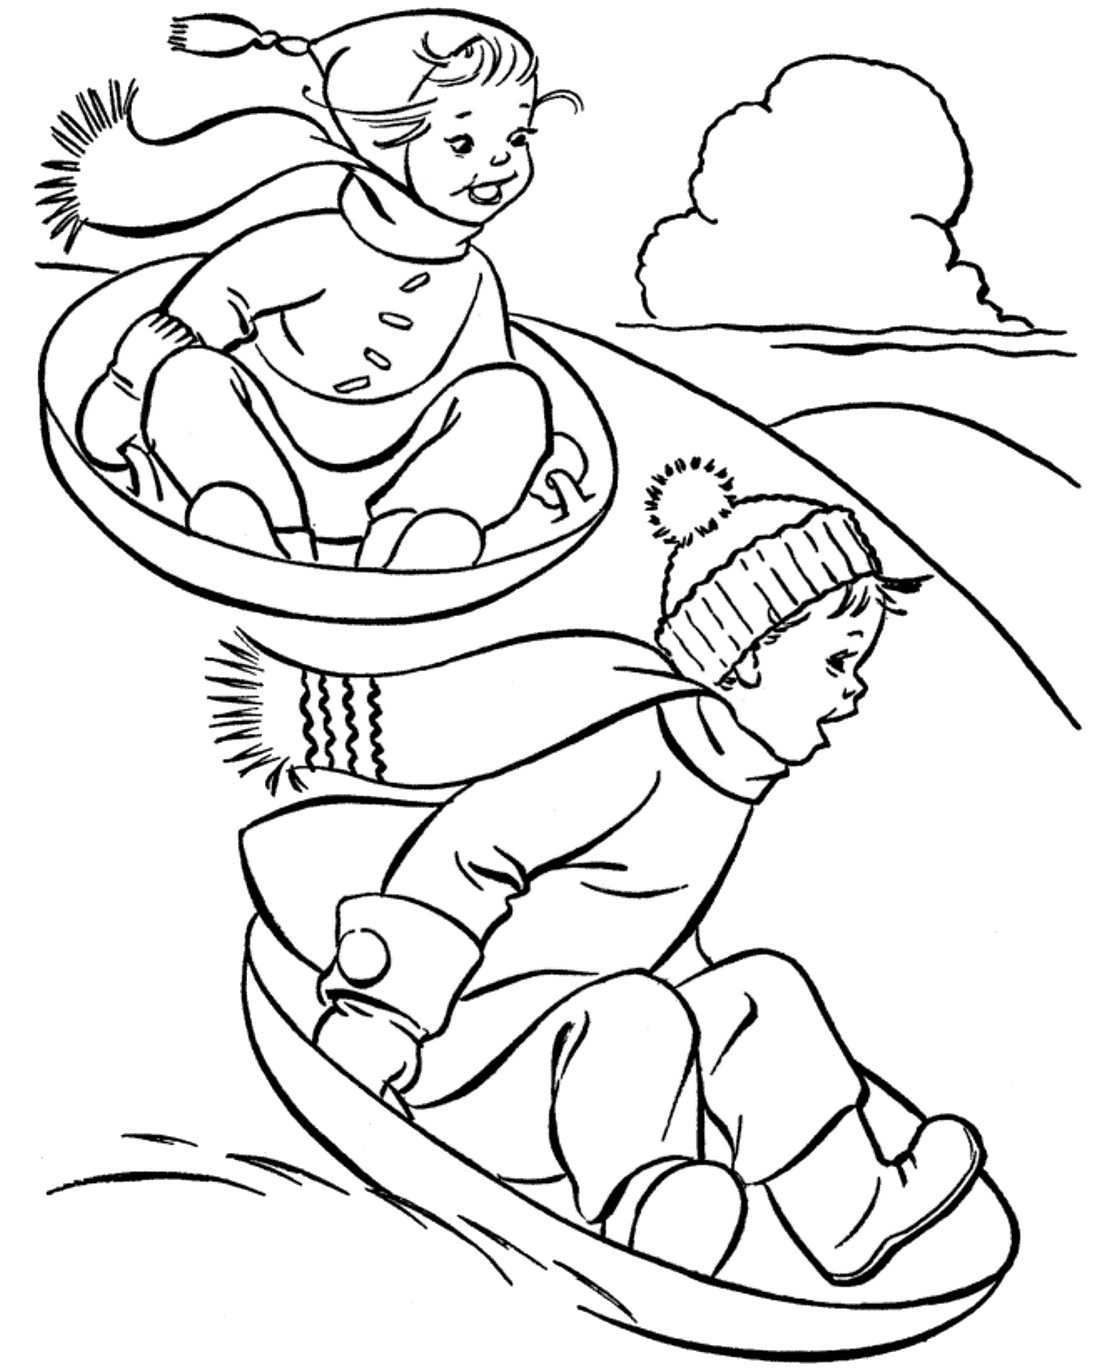 Winter Coloring Sheets For Kids
 Sports graph Coloring Pages Kids Winter Sports